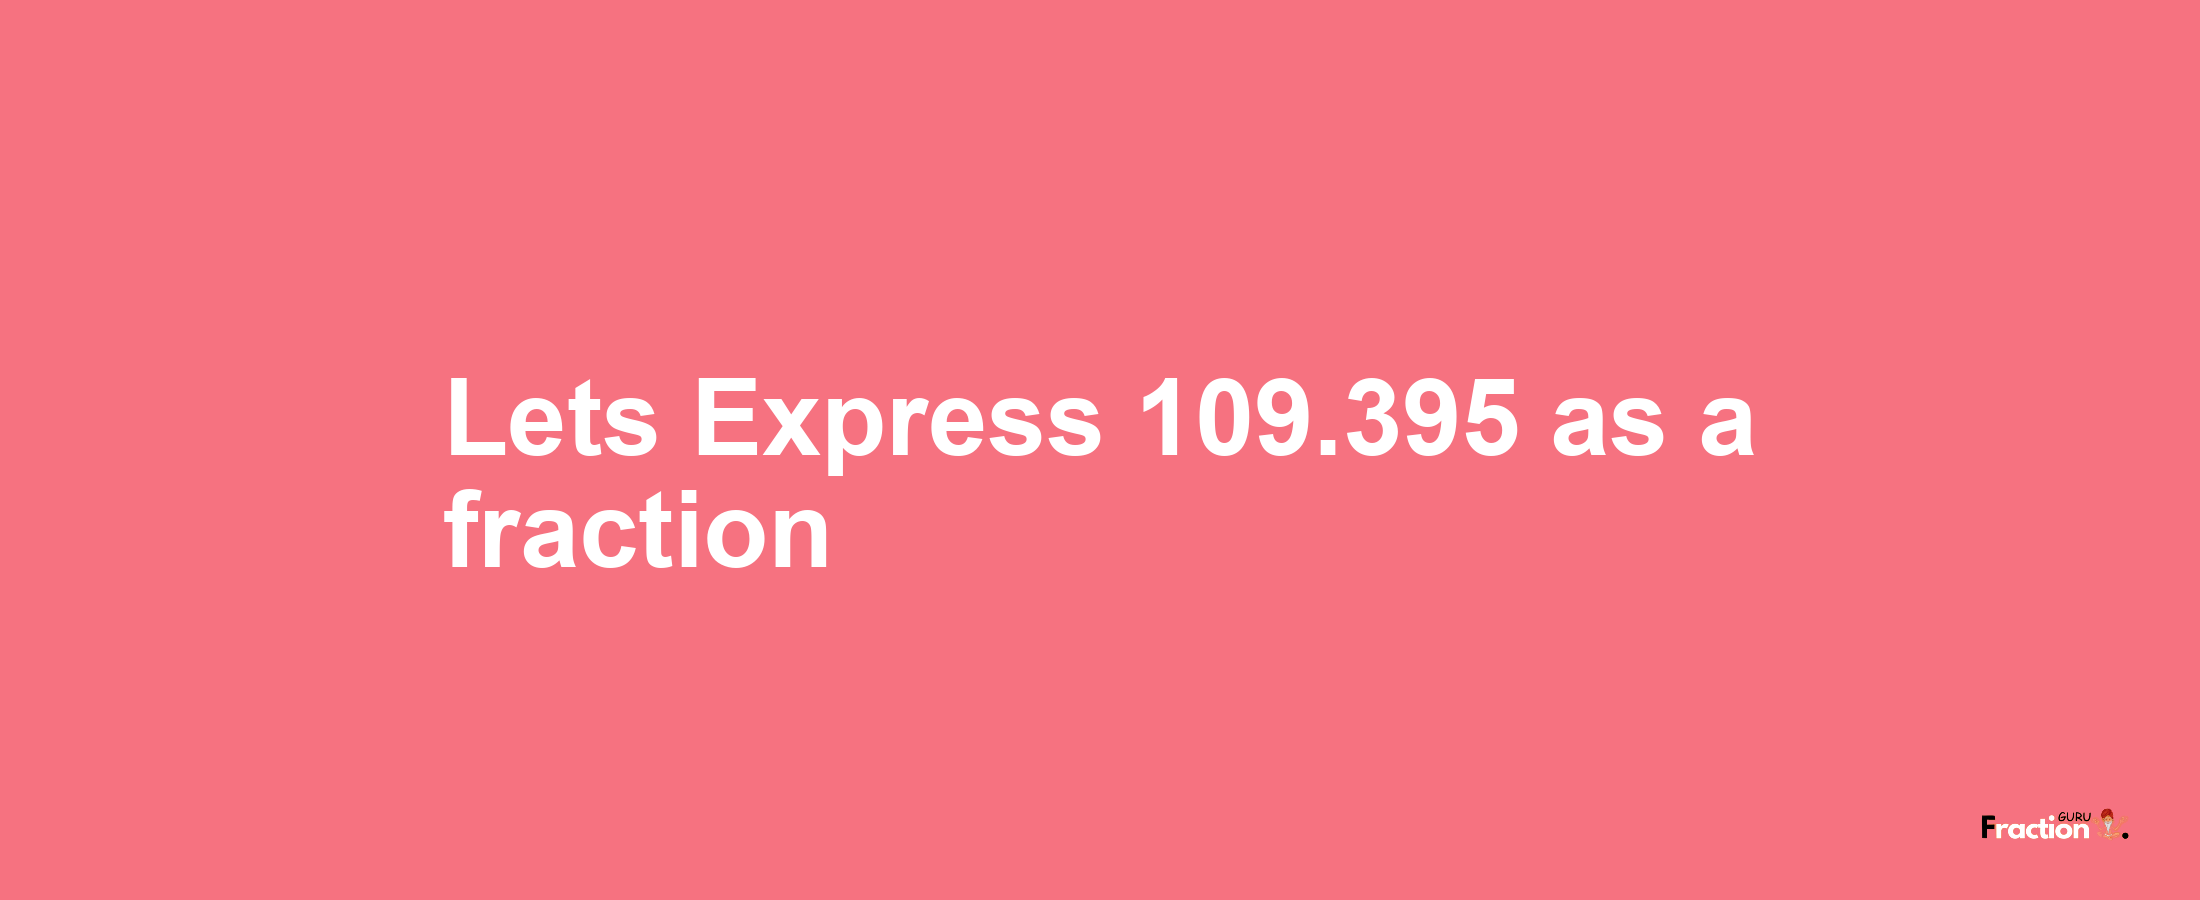 Lets Express 109.395 as afraction